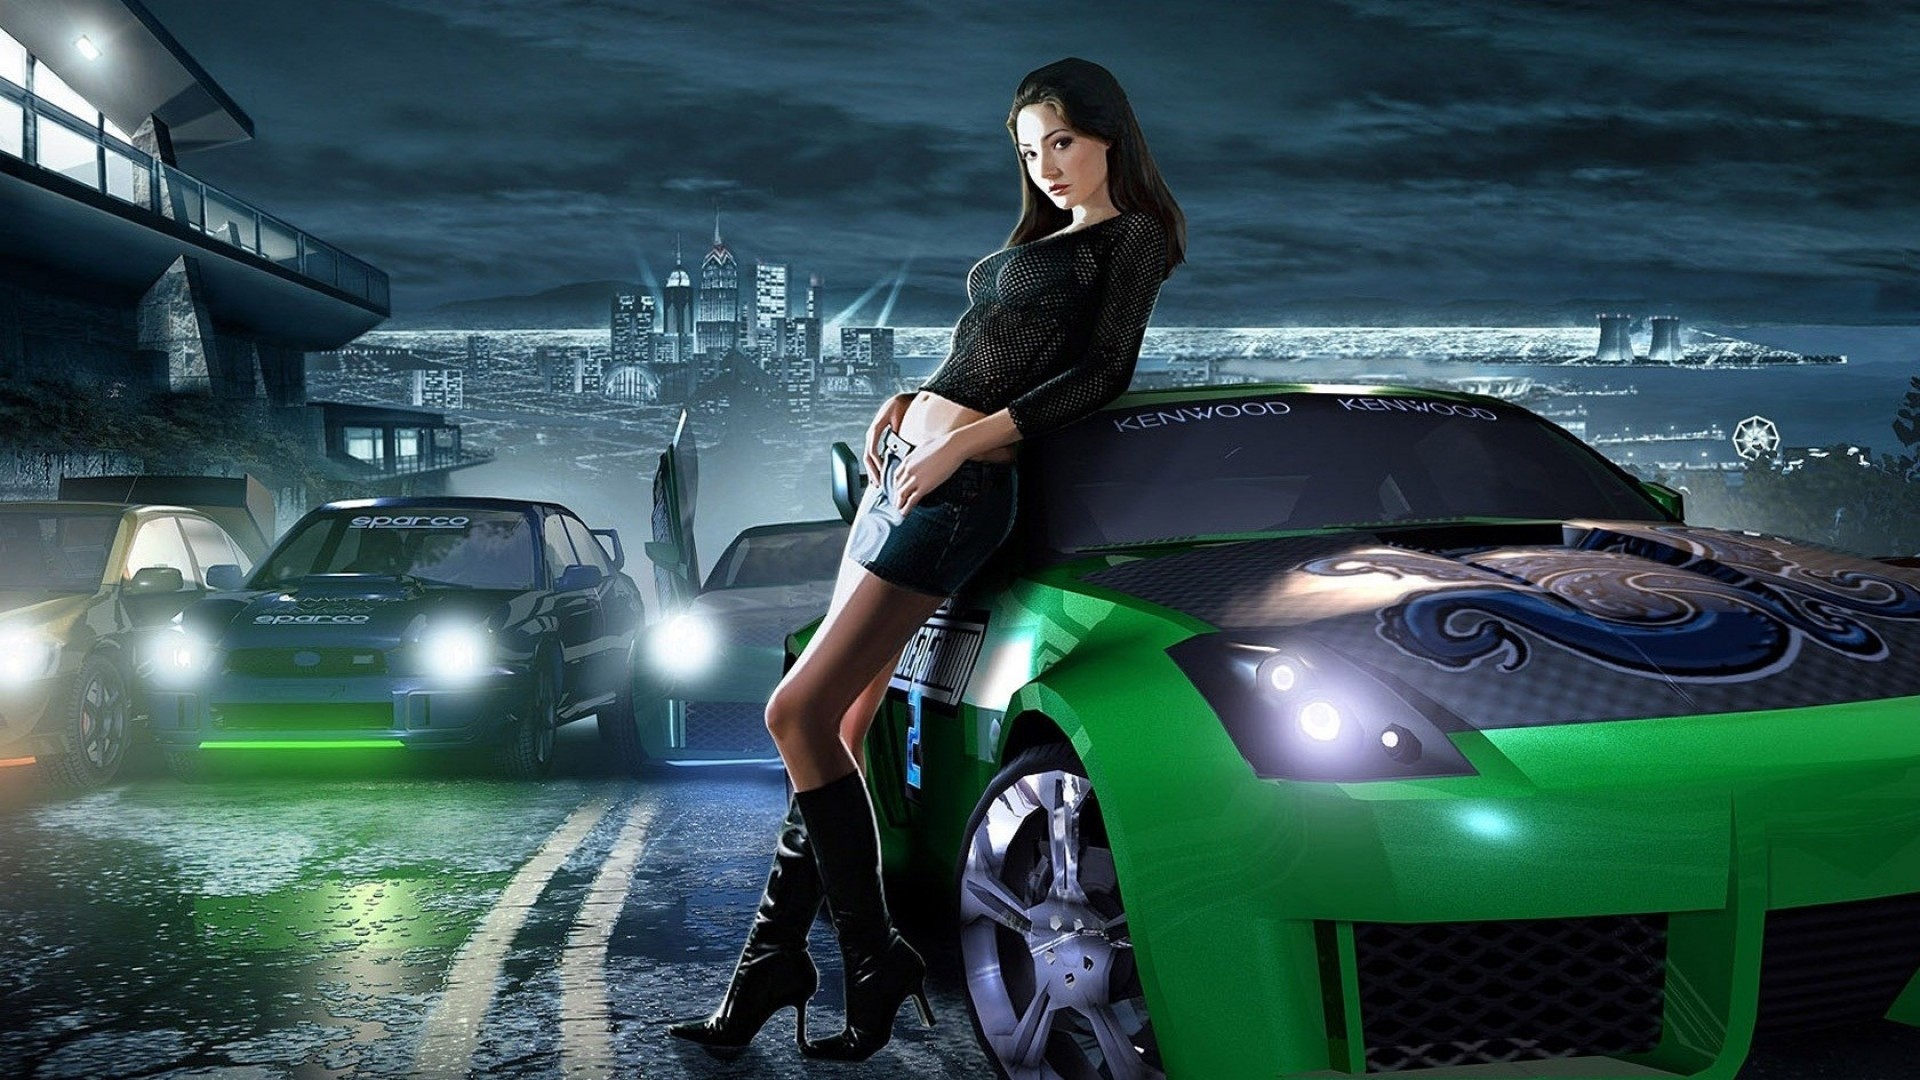 1920x1080  Wallpaper nfs, need for speed, girl, car, city, road